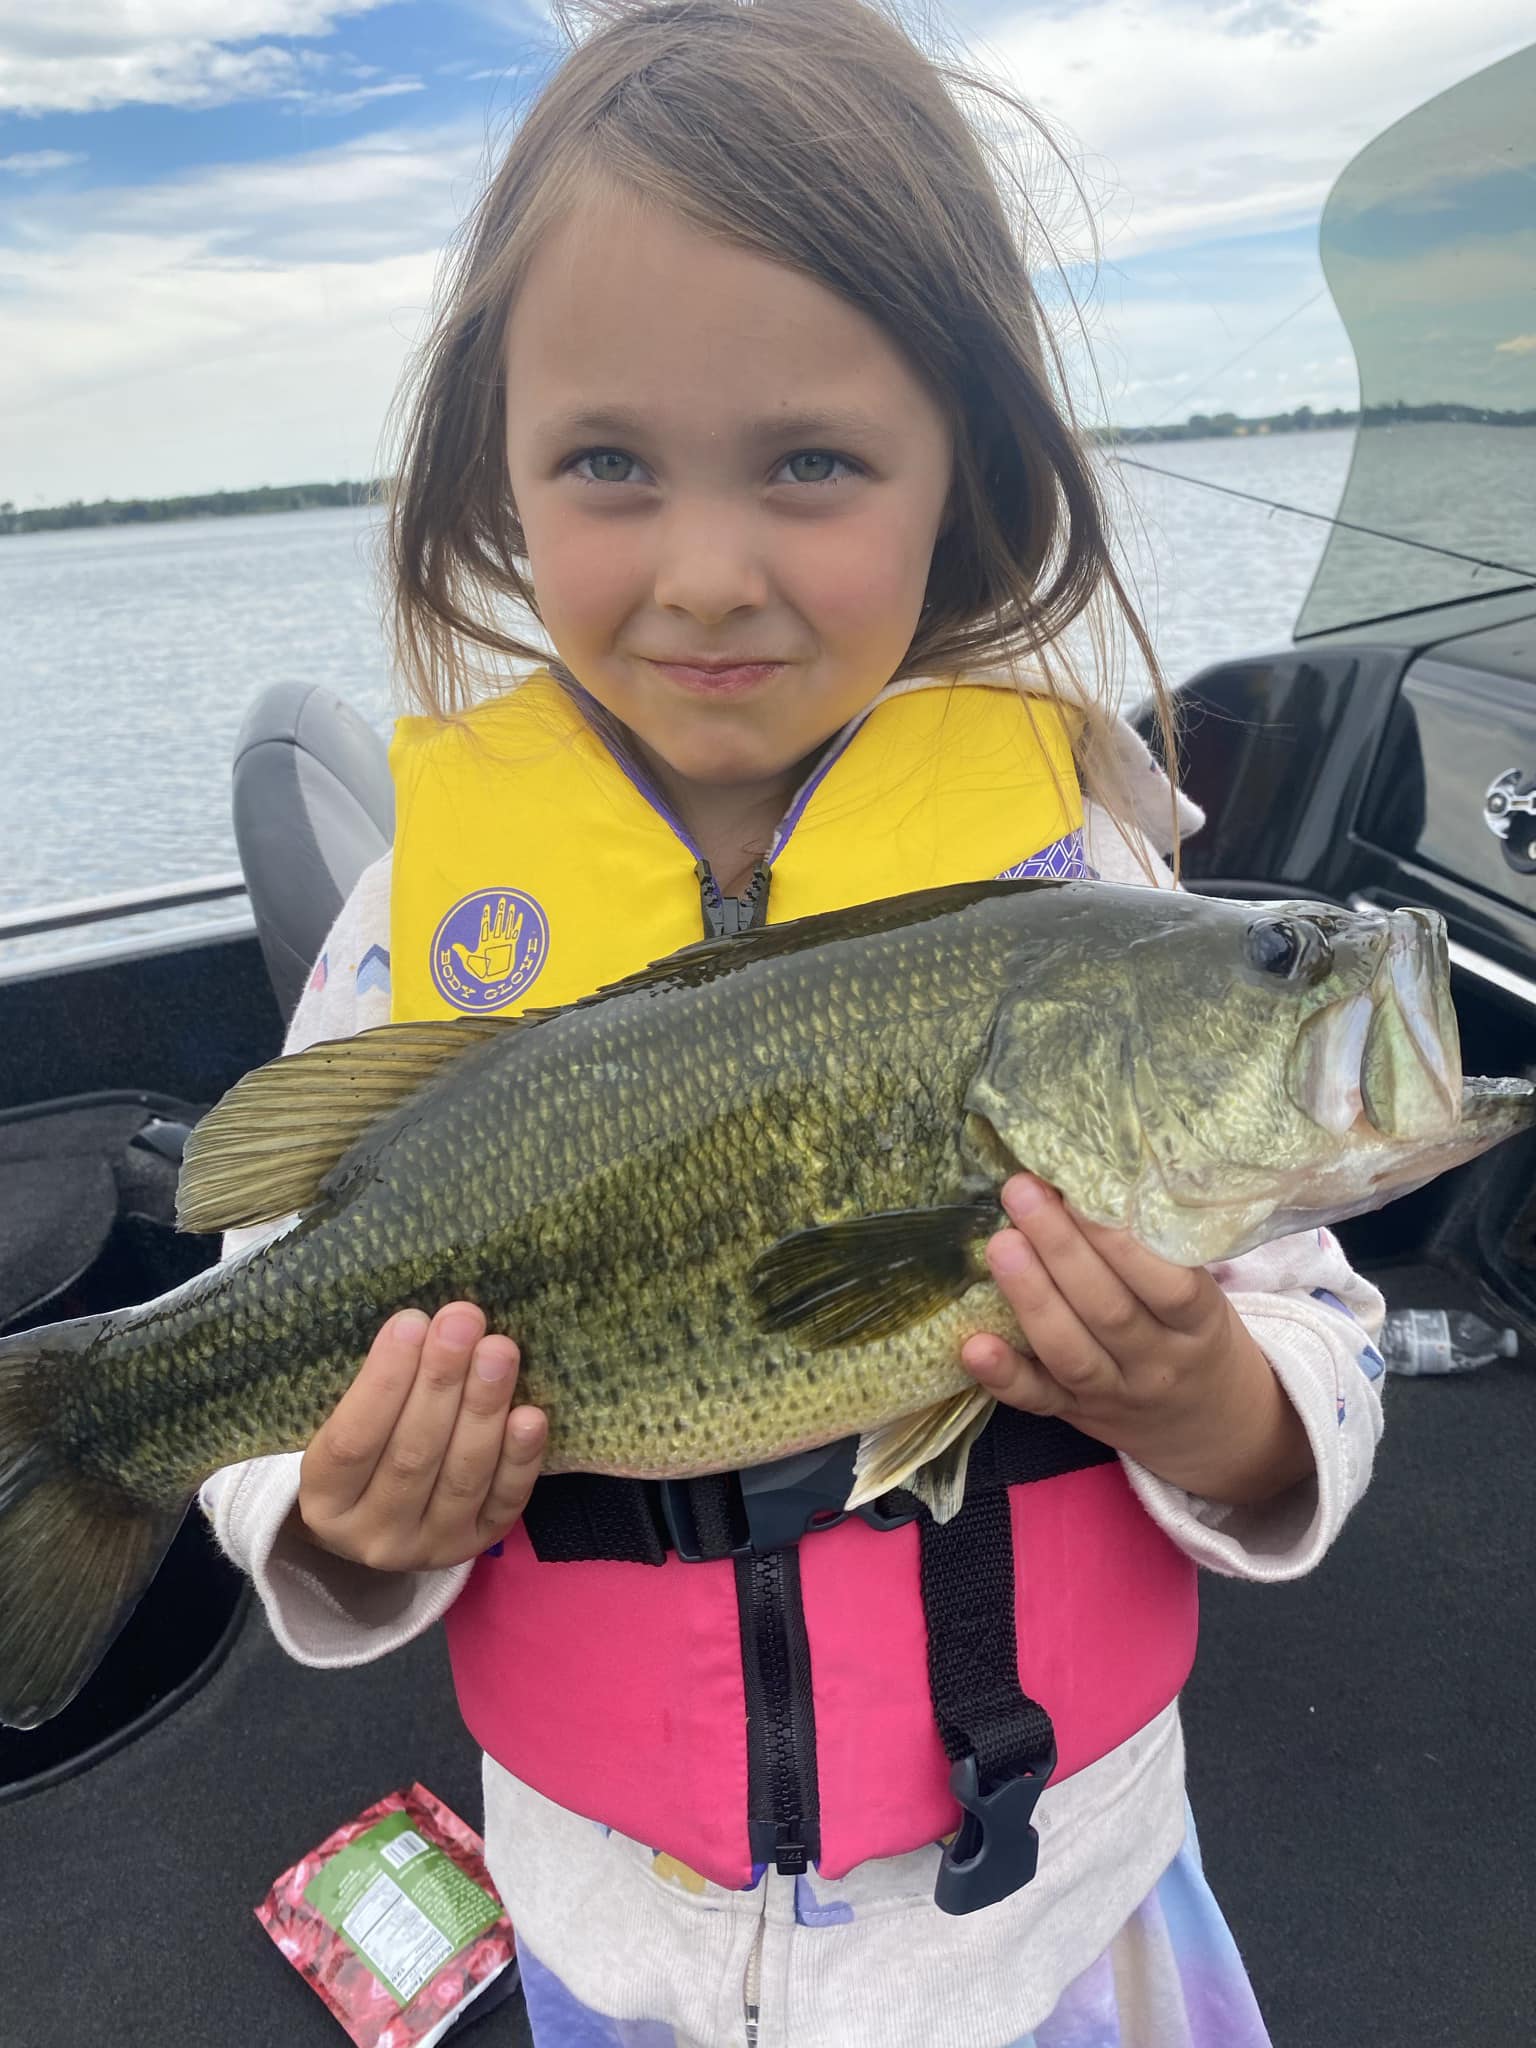 Summer & Fall Fishing Sees an Exciting New Wave of Female Anglers